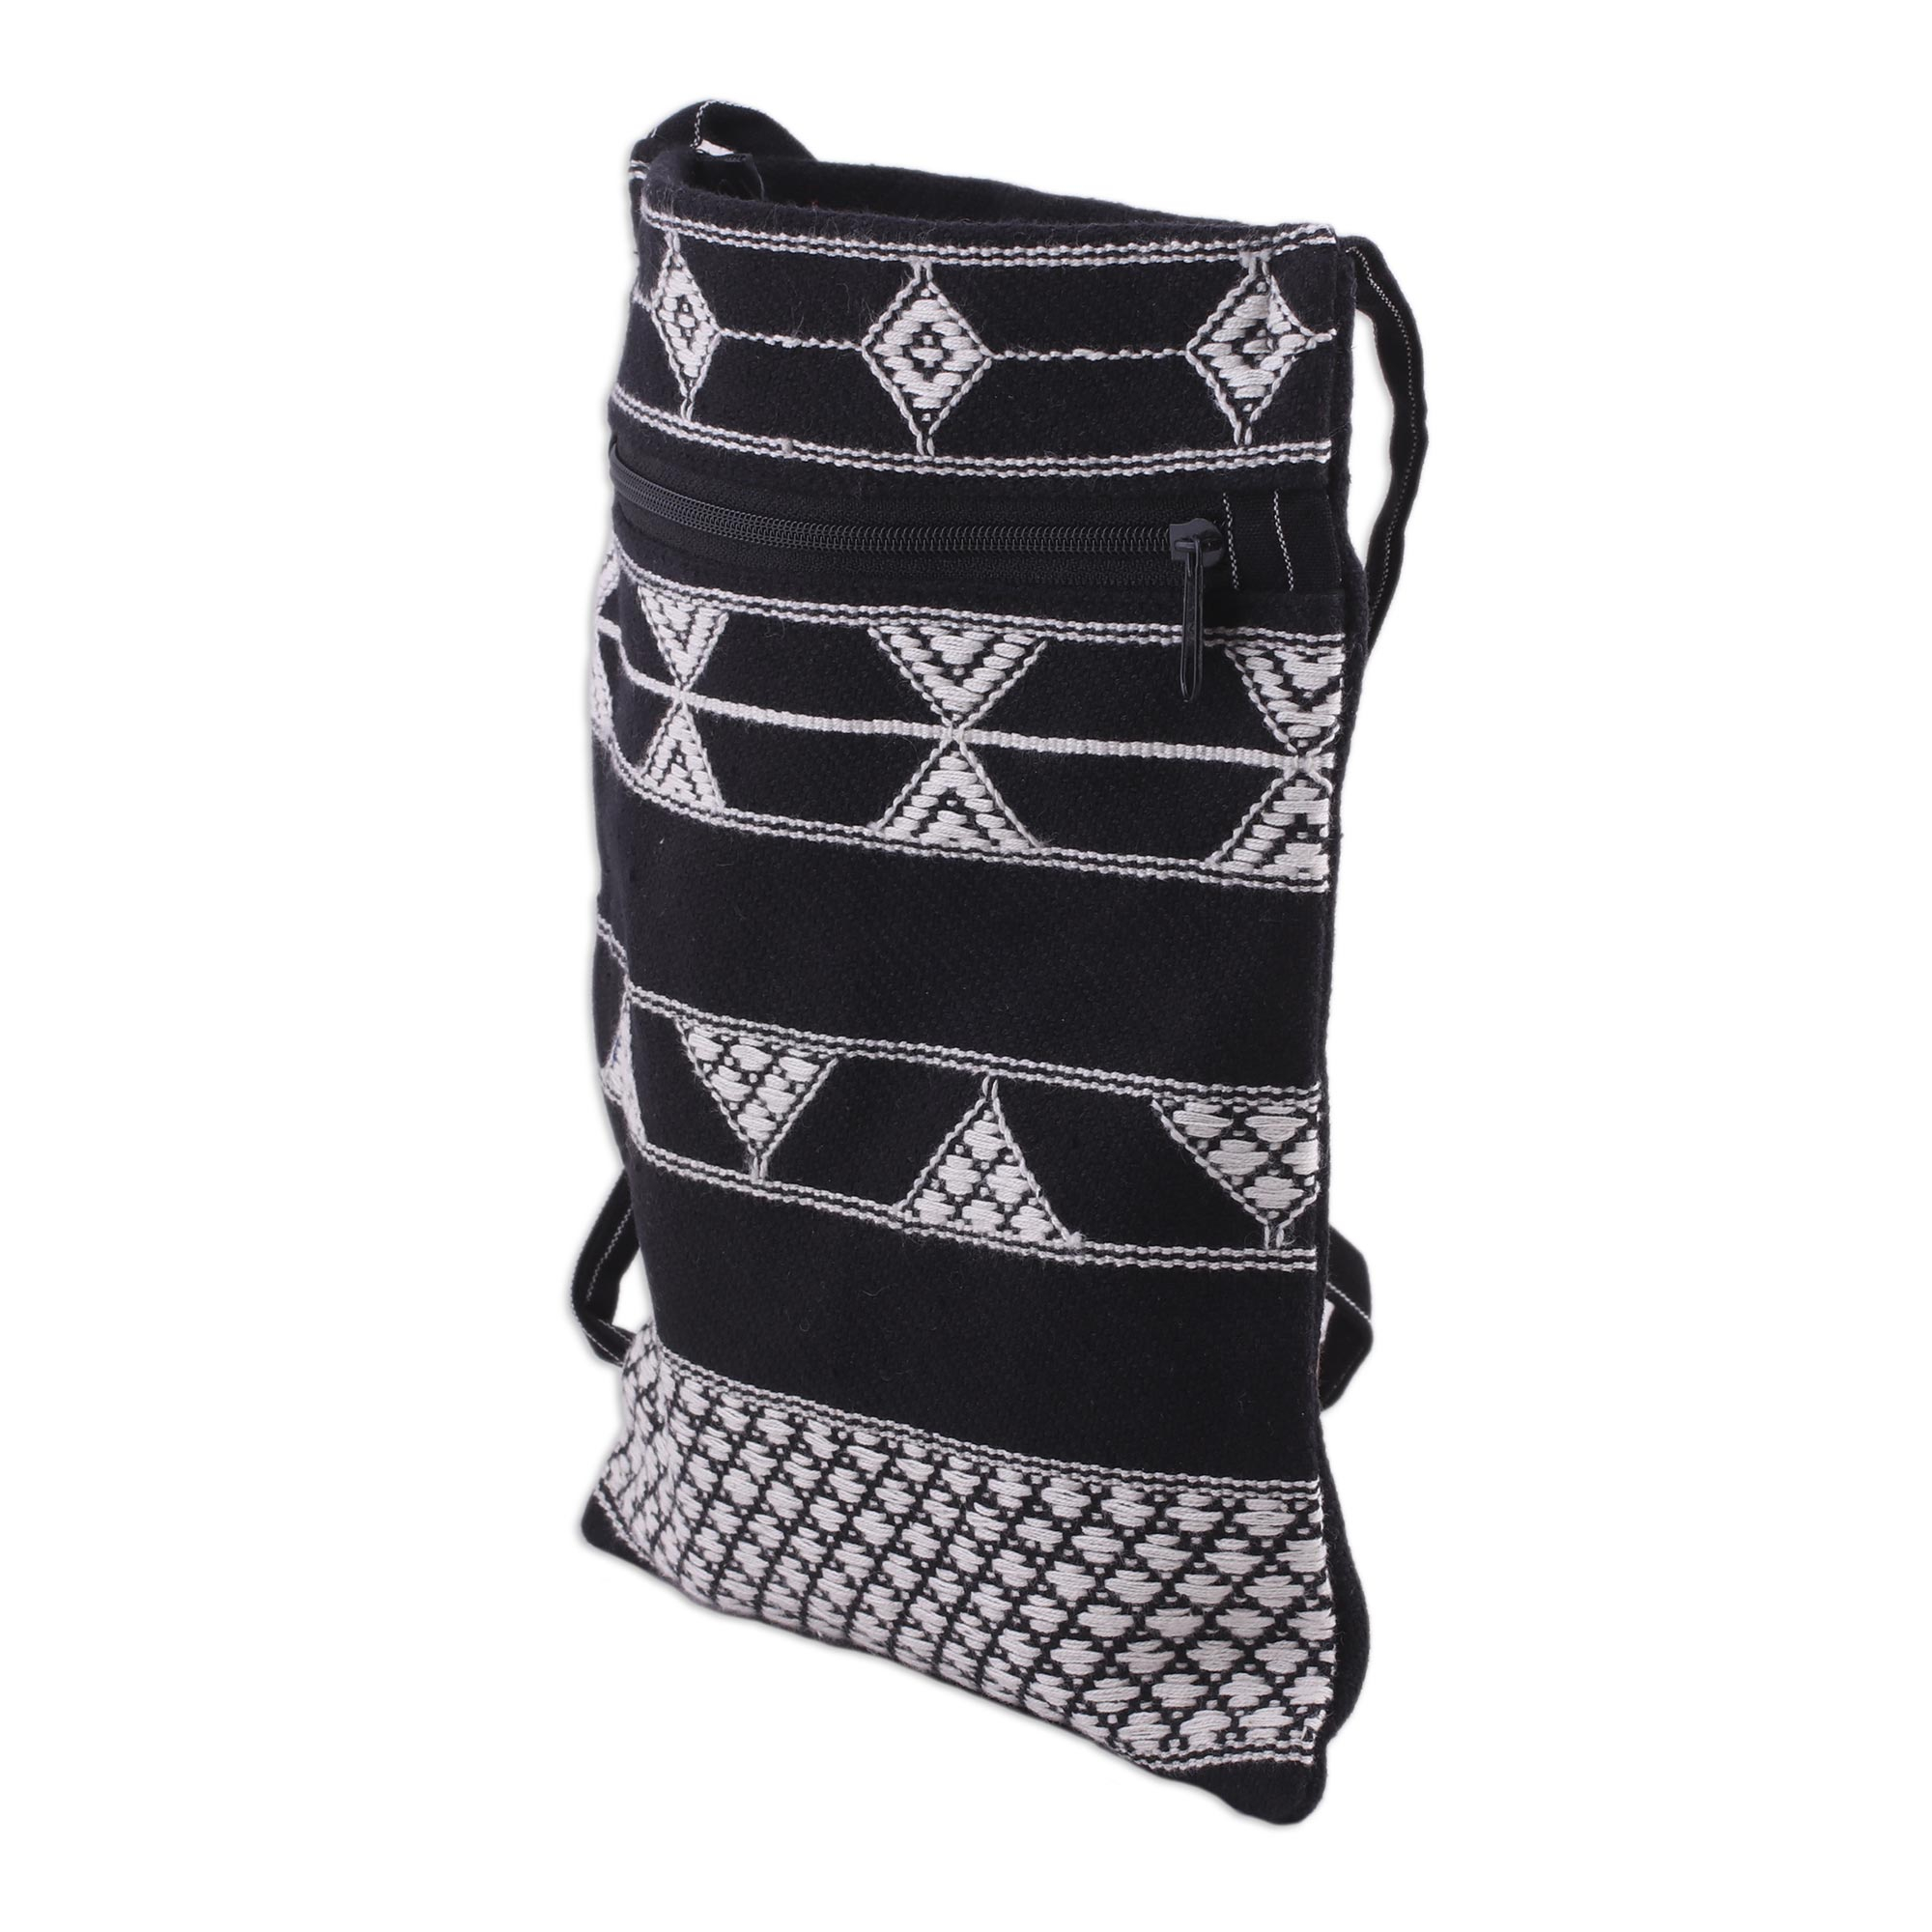 UNICEF Market | Hand Woven Black and White Cotton Sling Bag ...